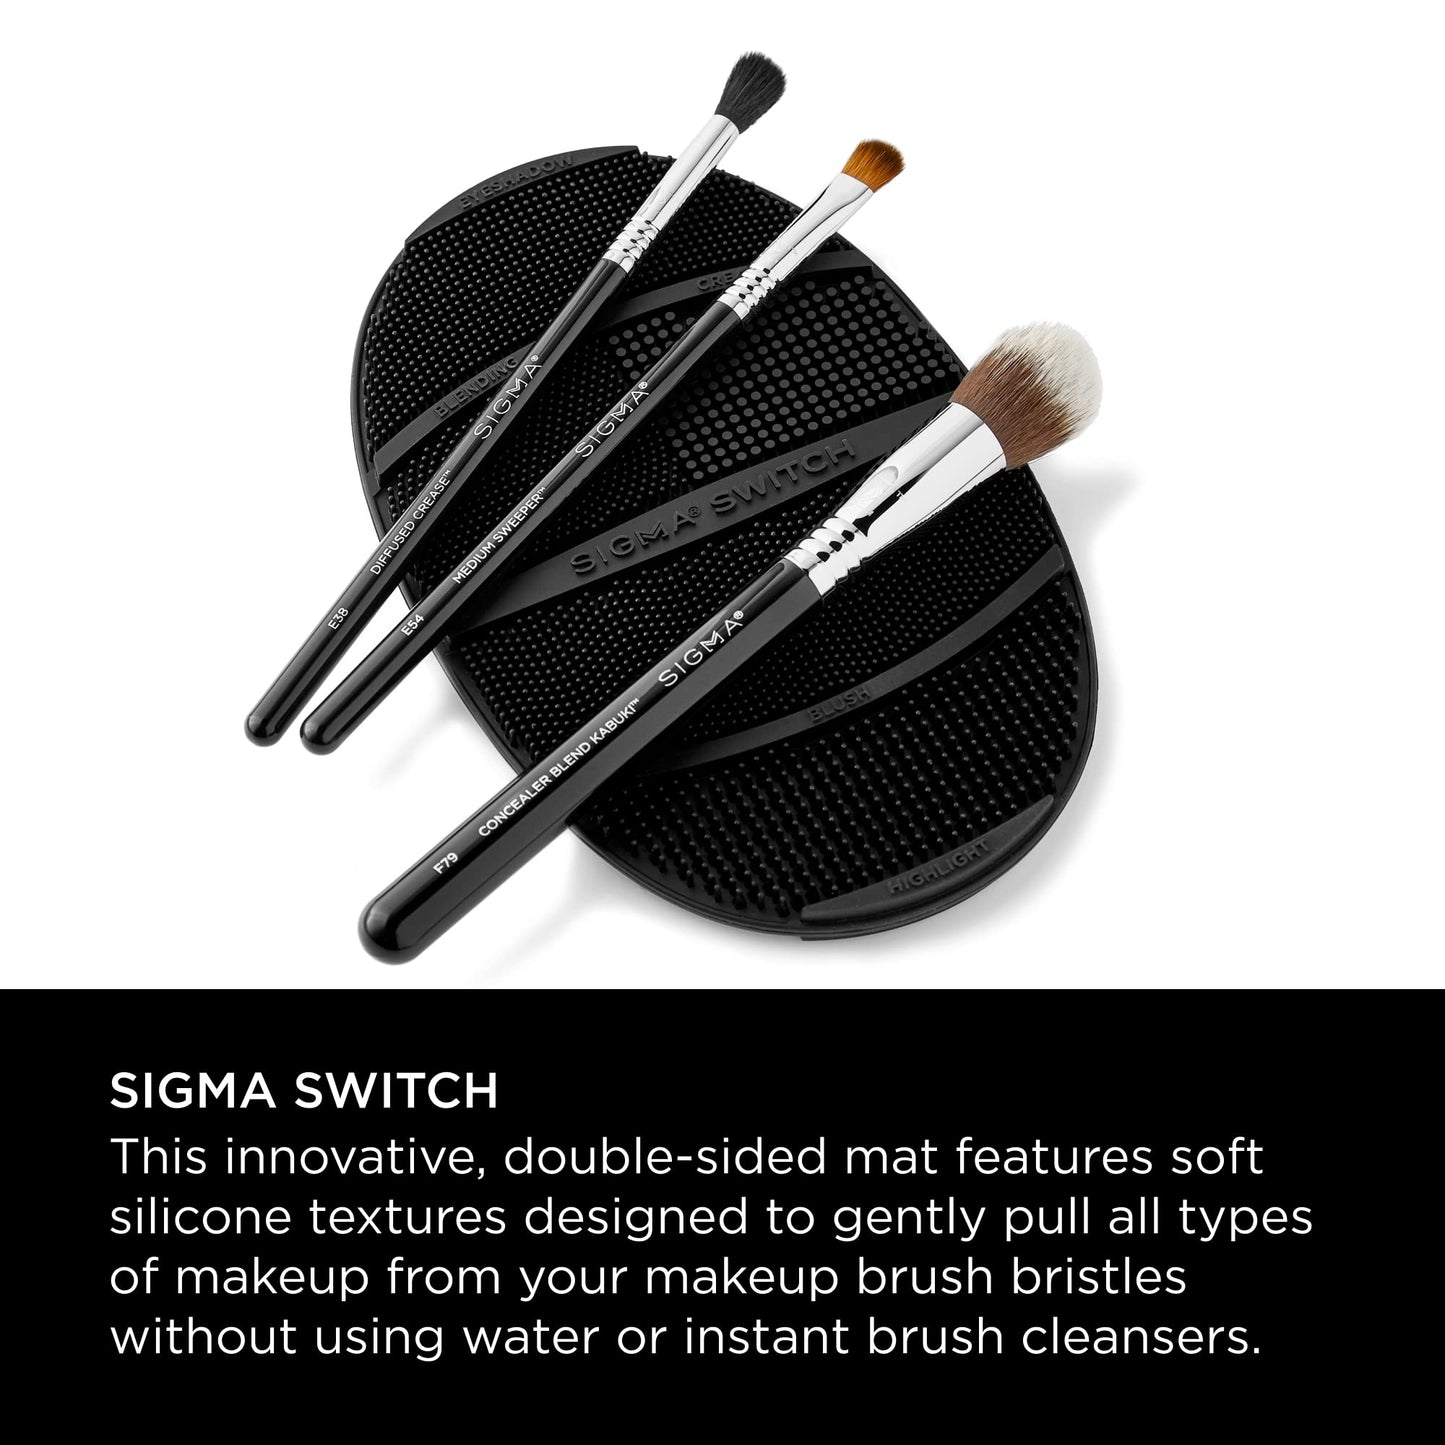 Sigma Switch by Sigma Beauty – Silicone Makeup Brush Cleaner for Switching Shades and Pigments, Switch Cleaning Mat for Superior Makeup Brush Cleaning Mid-Application (Full Size)